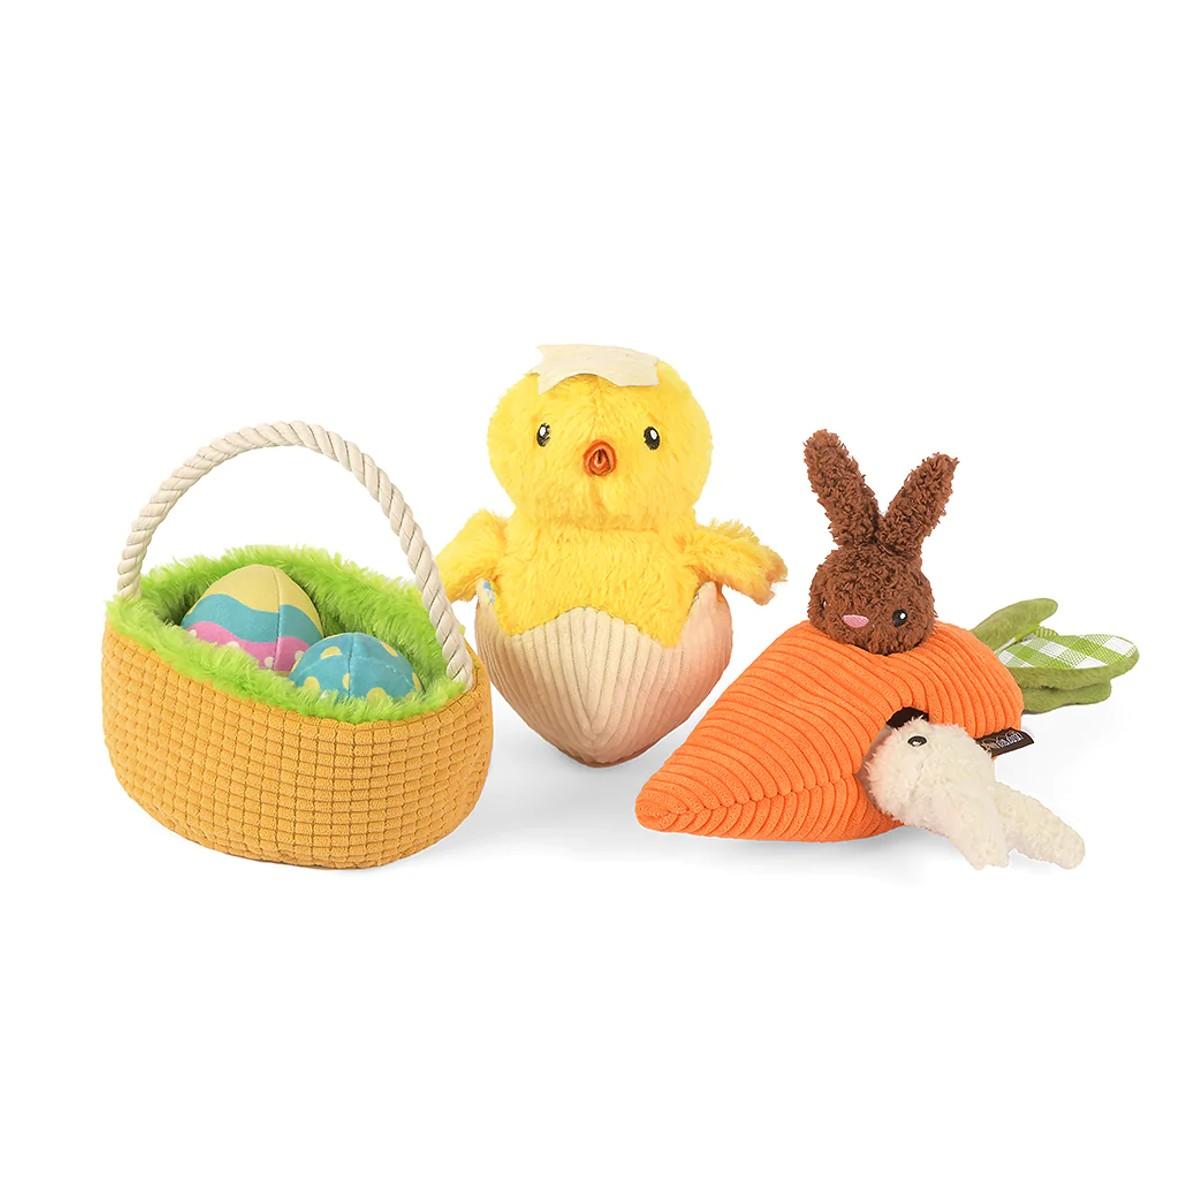 P.L.A.Y. Easter Hippity Hoppity Dog Toy Collection - 3 Piece Set